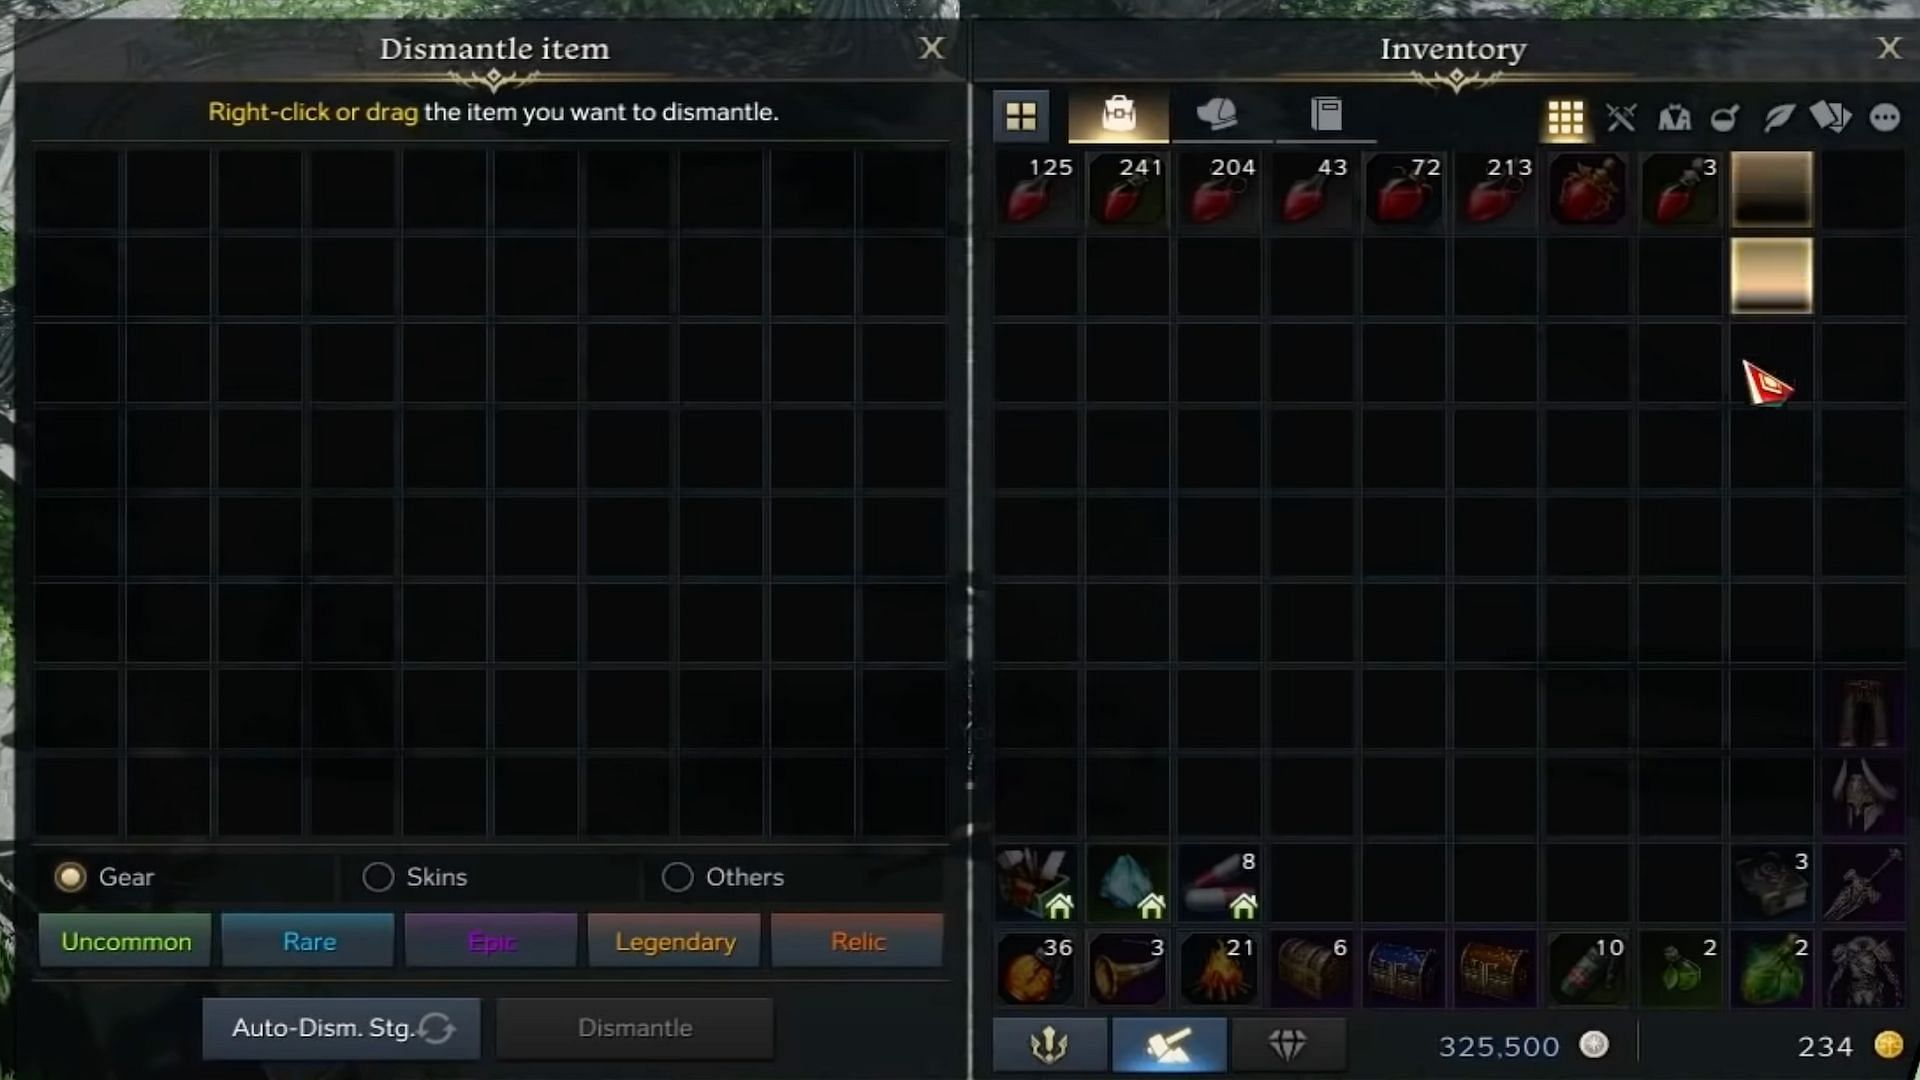 There are benefits to both selling and dismantling items (Image via Dvalin/YouTube)